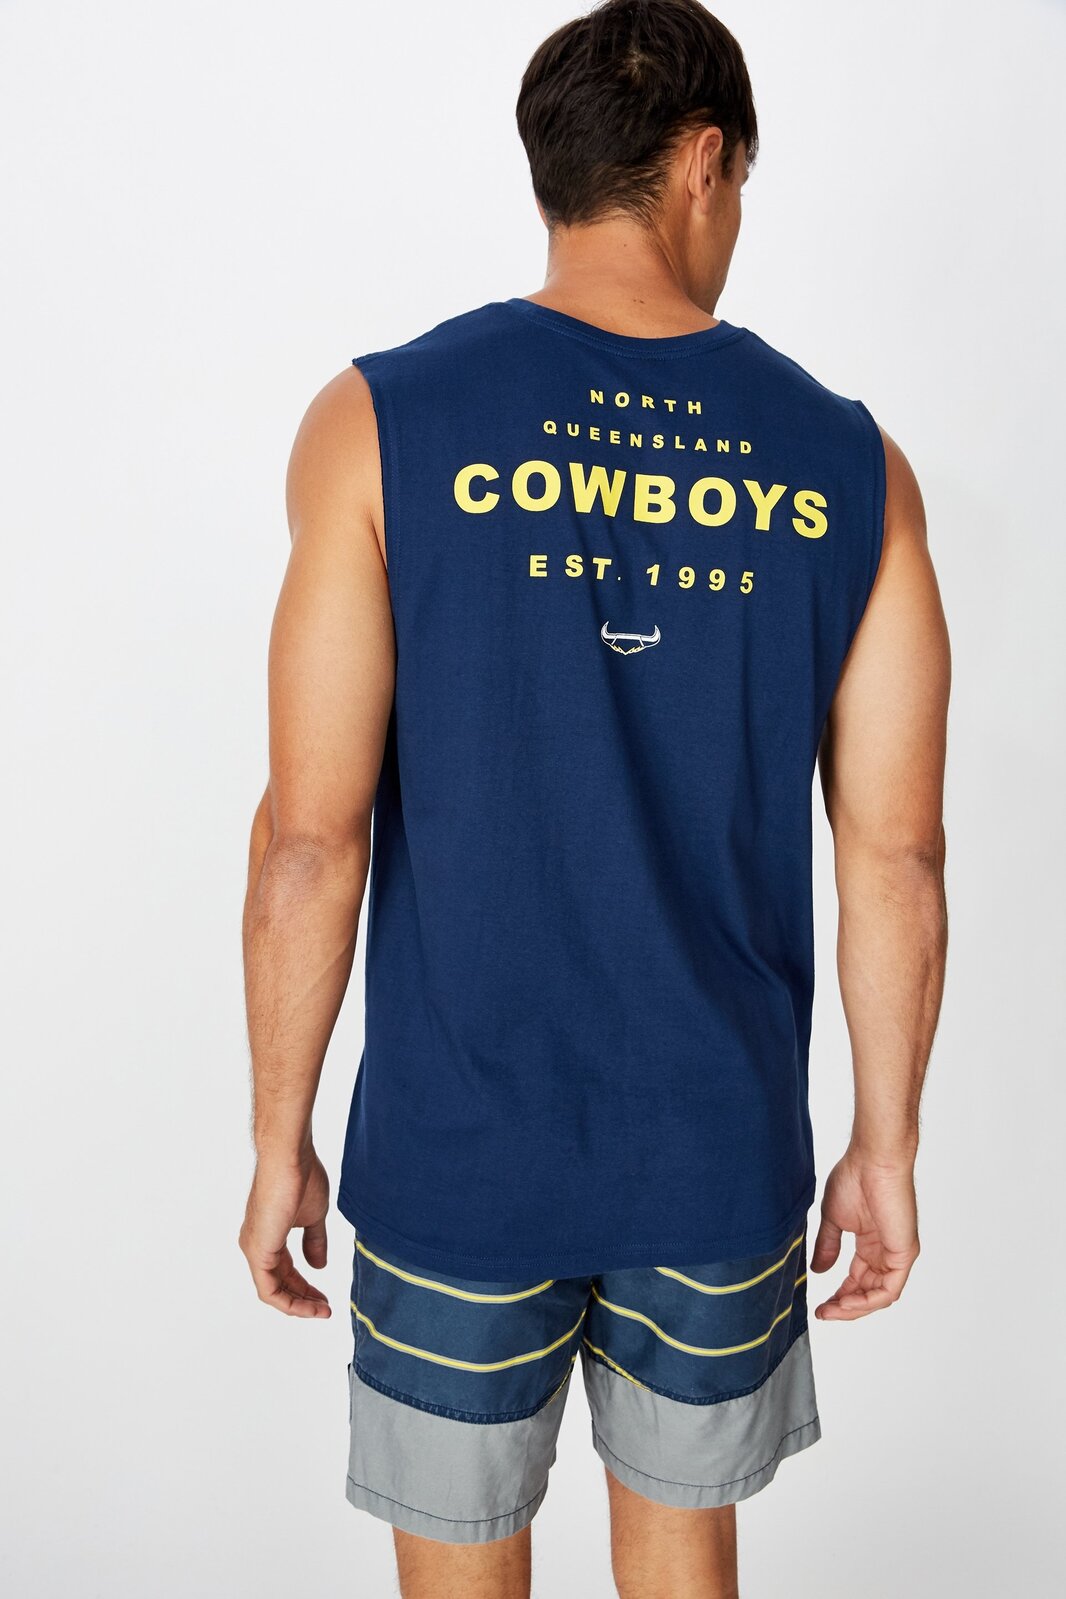 North Queensland Cowboys NRL 2021 Cotton On Tank Top Singlet Sizes S-2XL! 